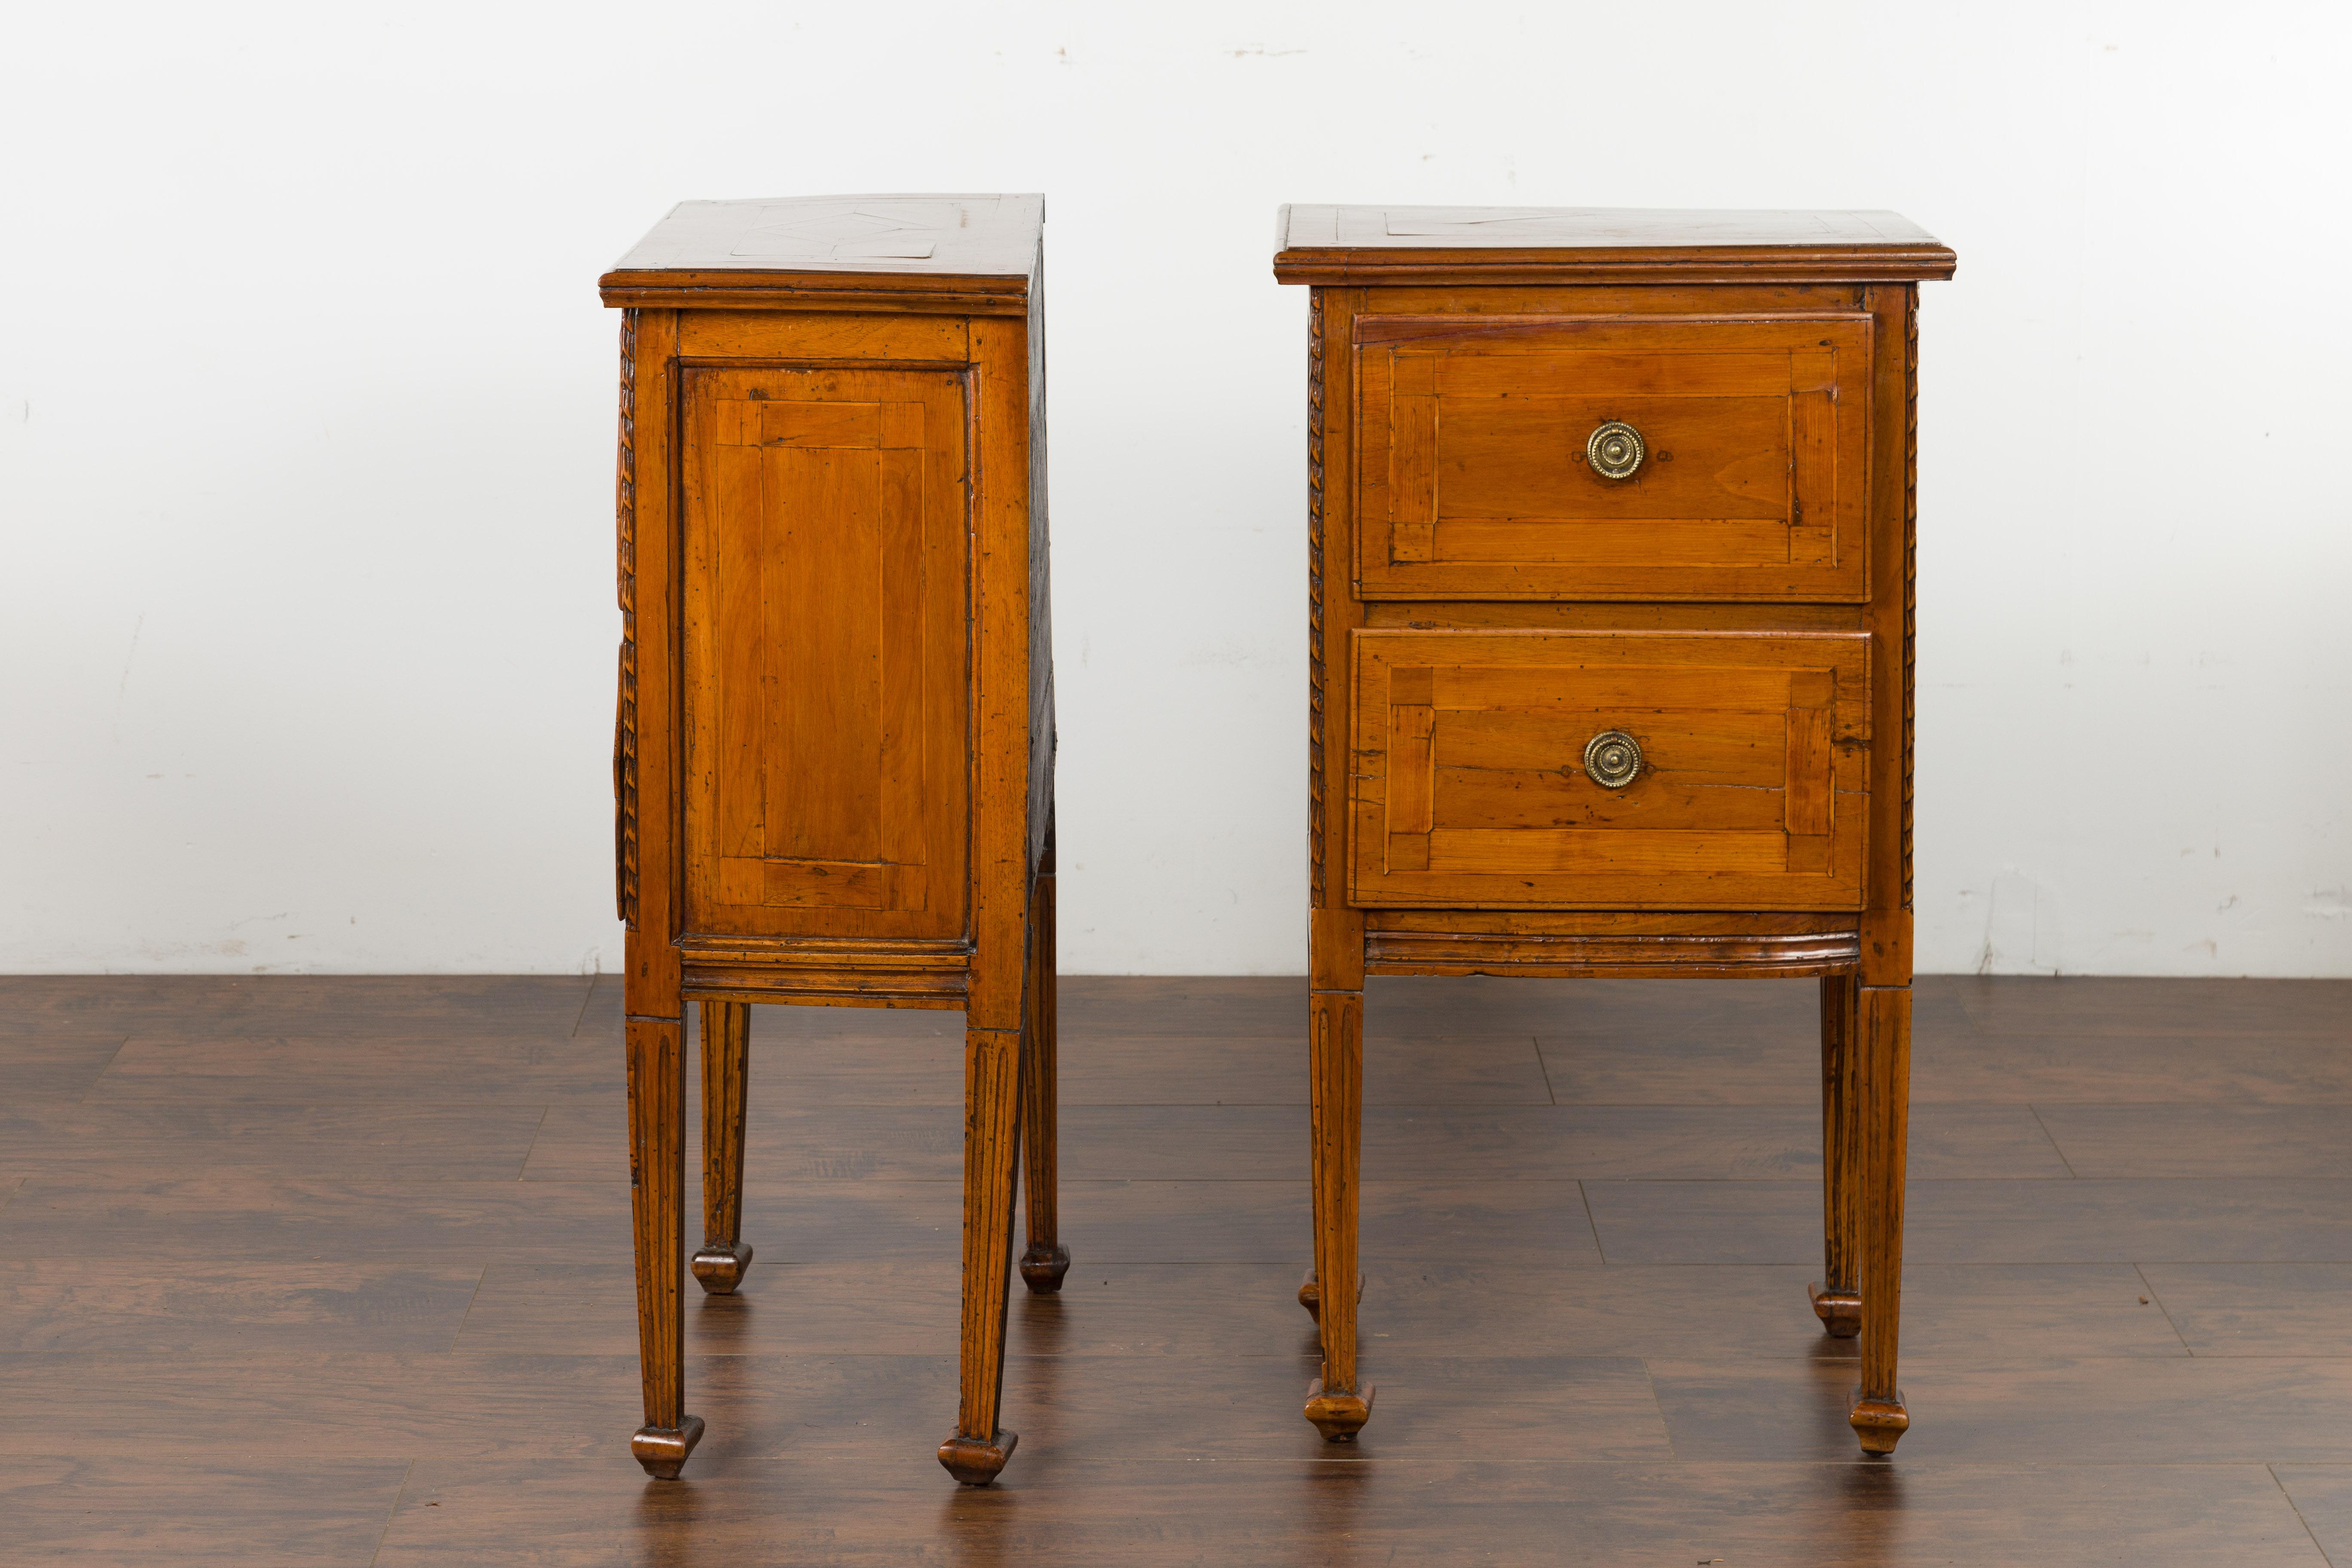 Pair of Italian 1820s Neoclassical Period Walnut Bedside Tables with Two Drawers For Sale 7